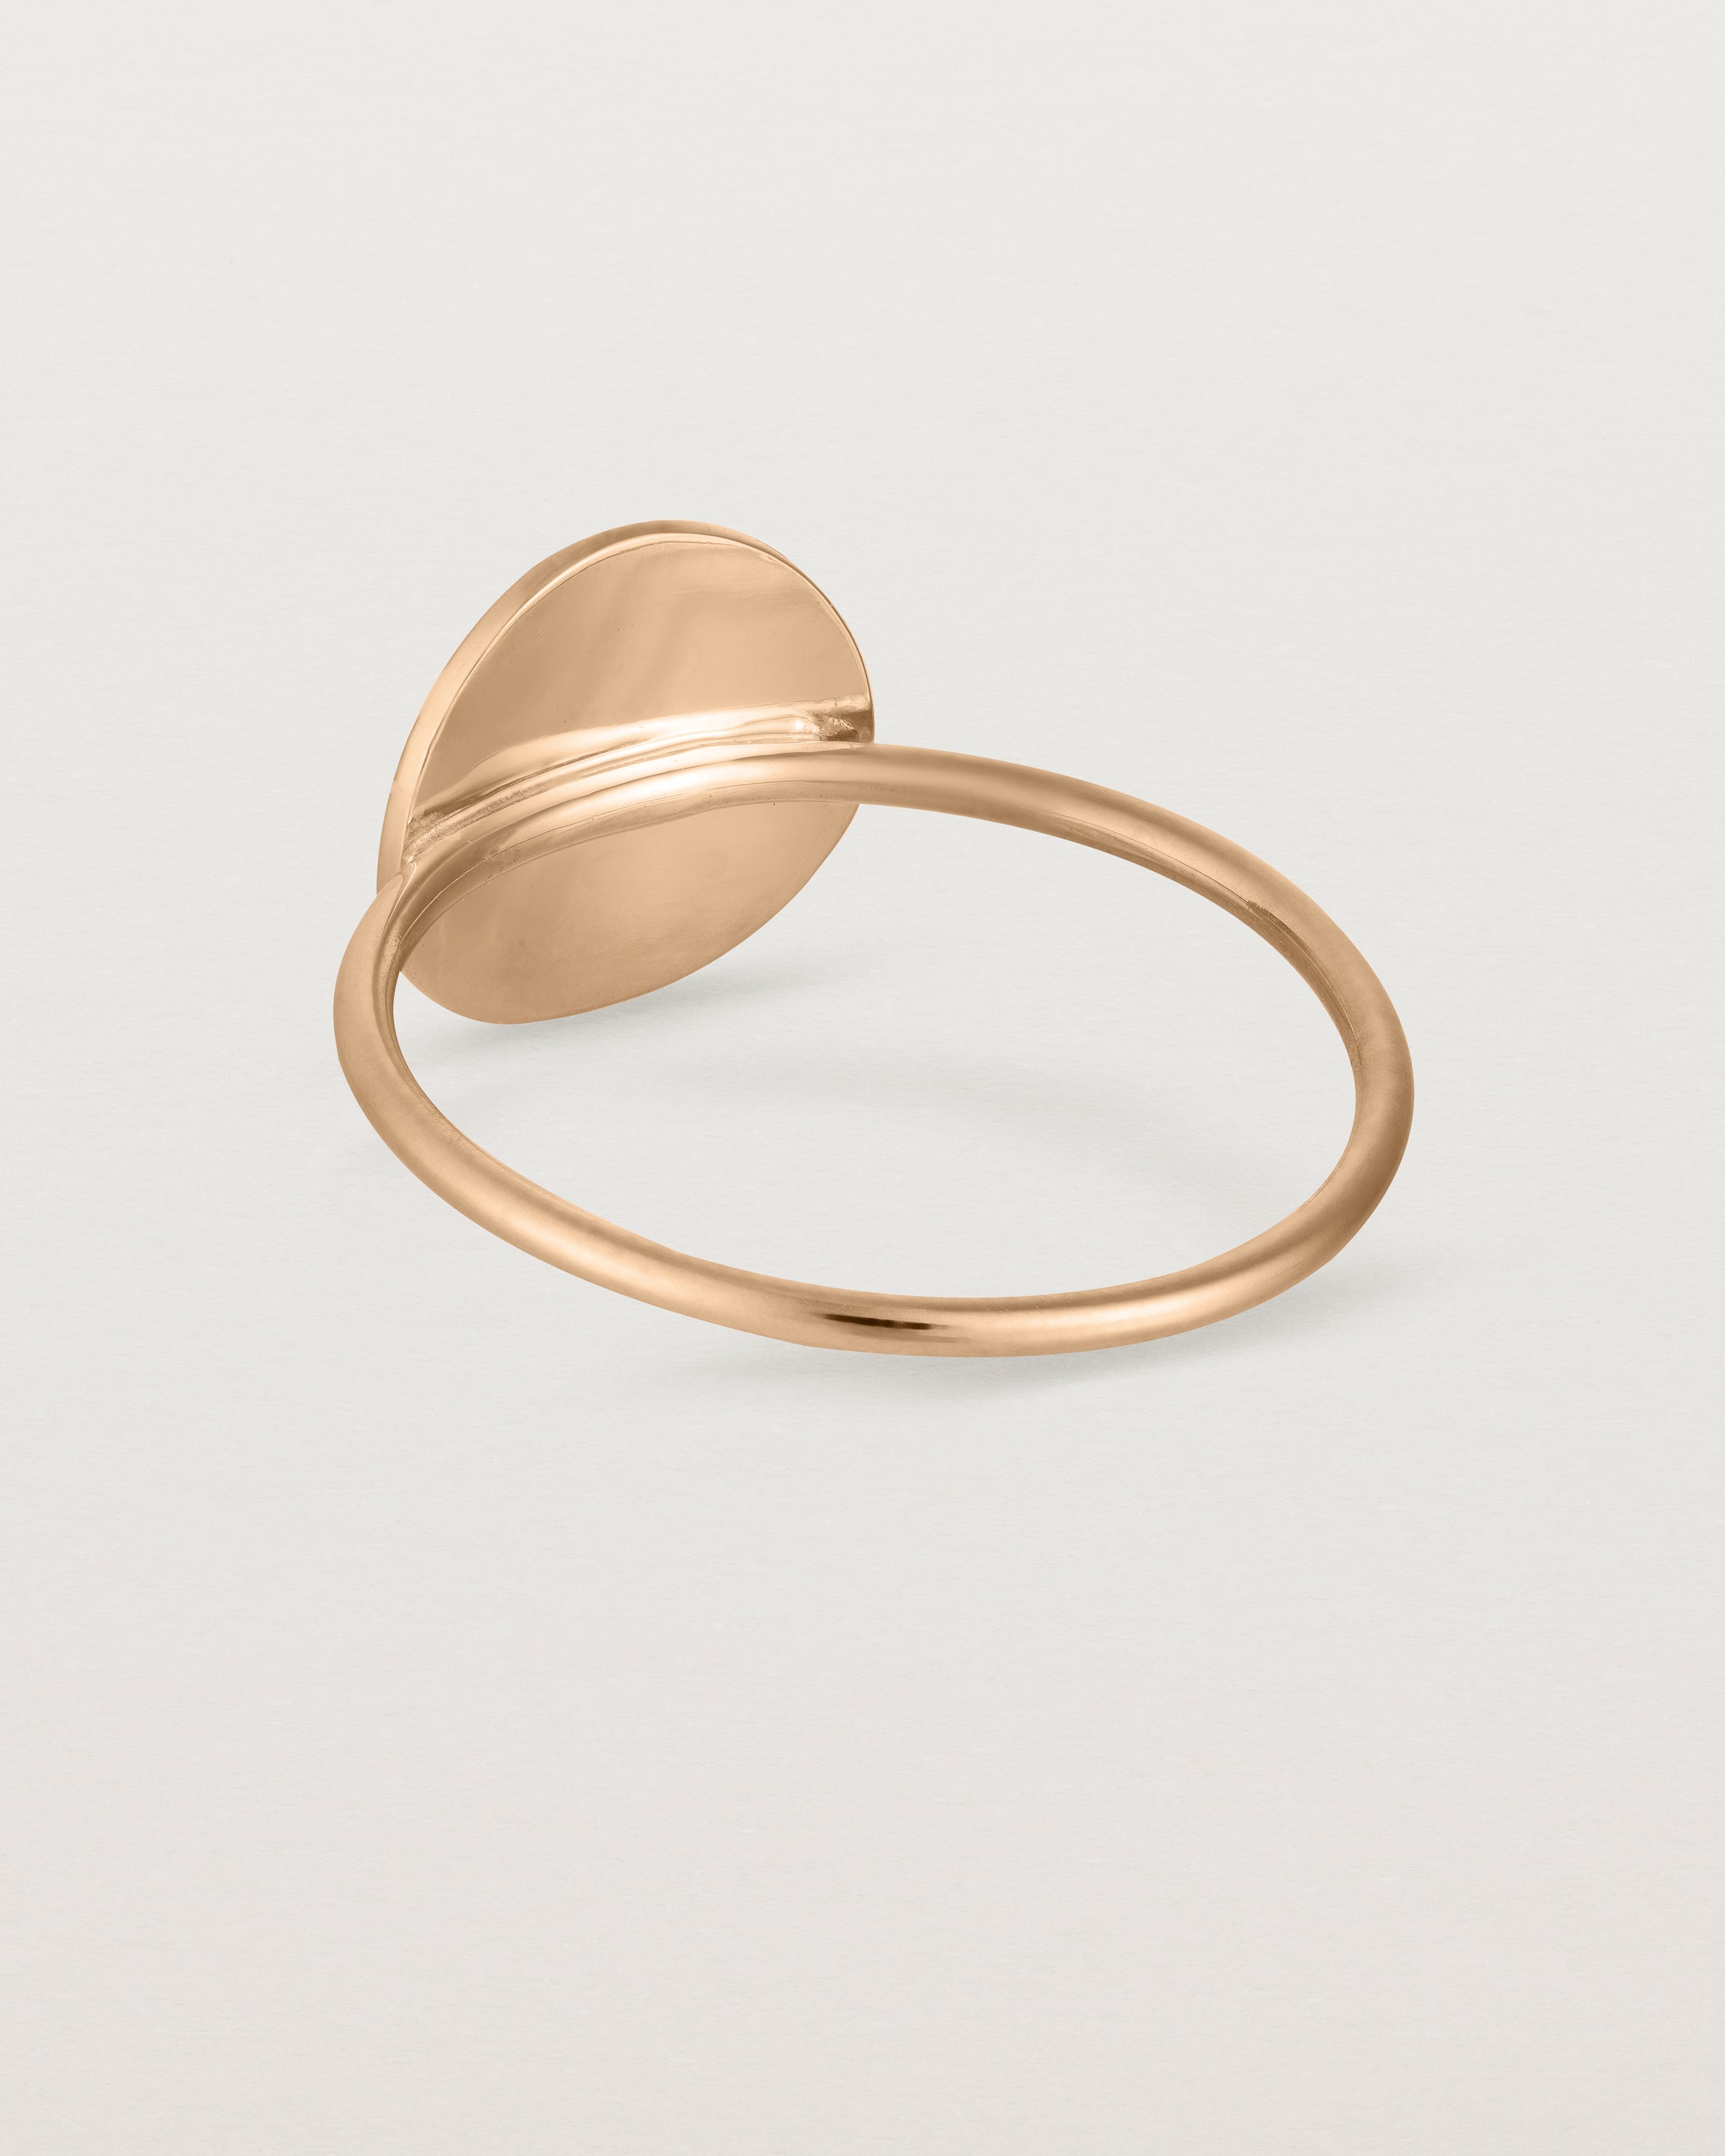 Back view of the Mini Initial Ring in Rose Gold.